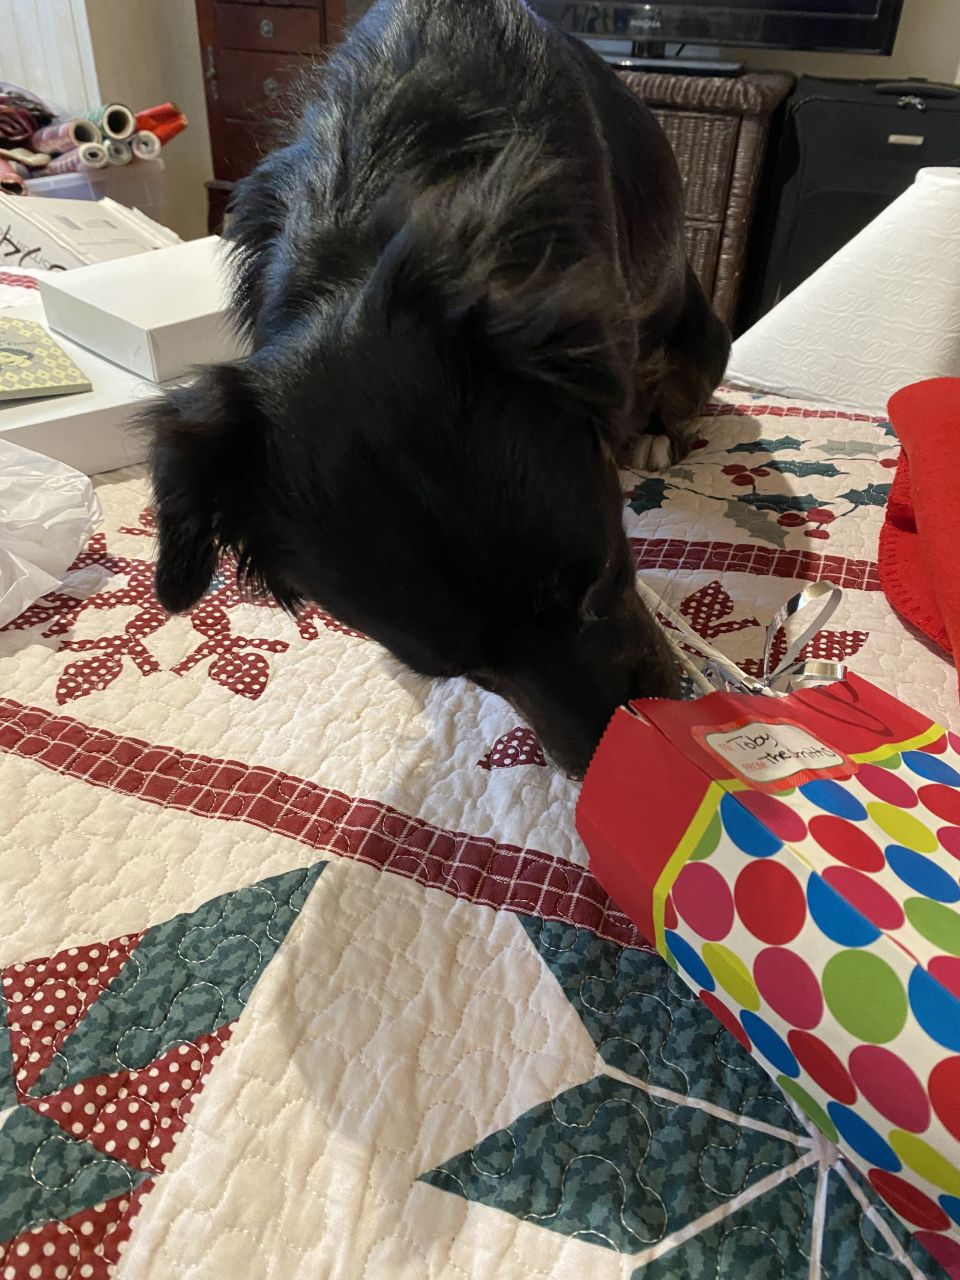 Better late than never, I am posting pics of Toby enjoying opening his Christmas presents!